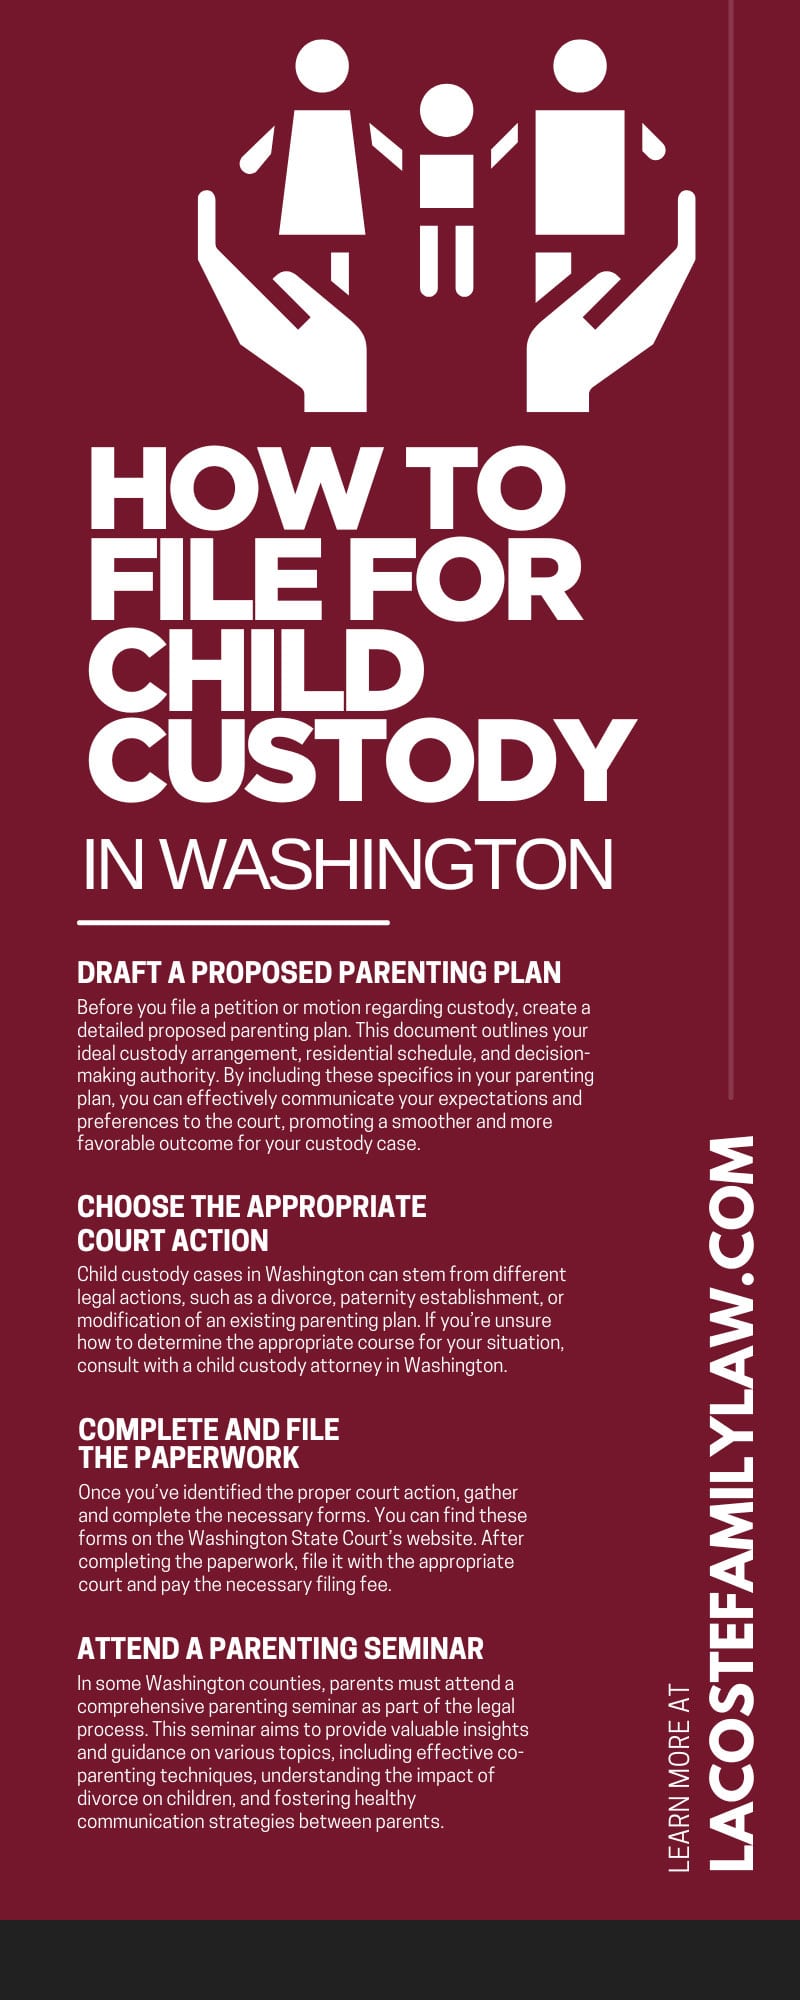 How To File for Child Custody in Washington